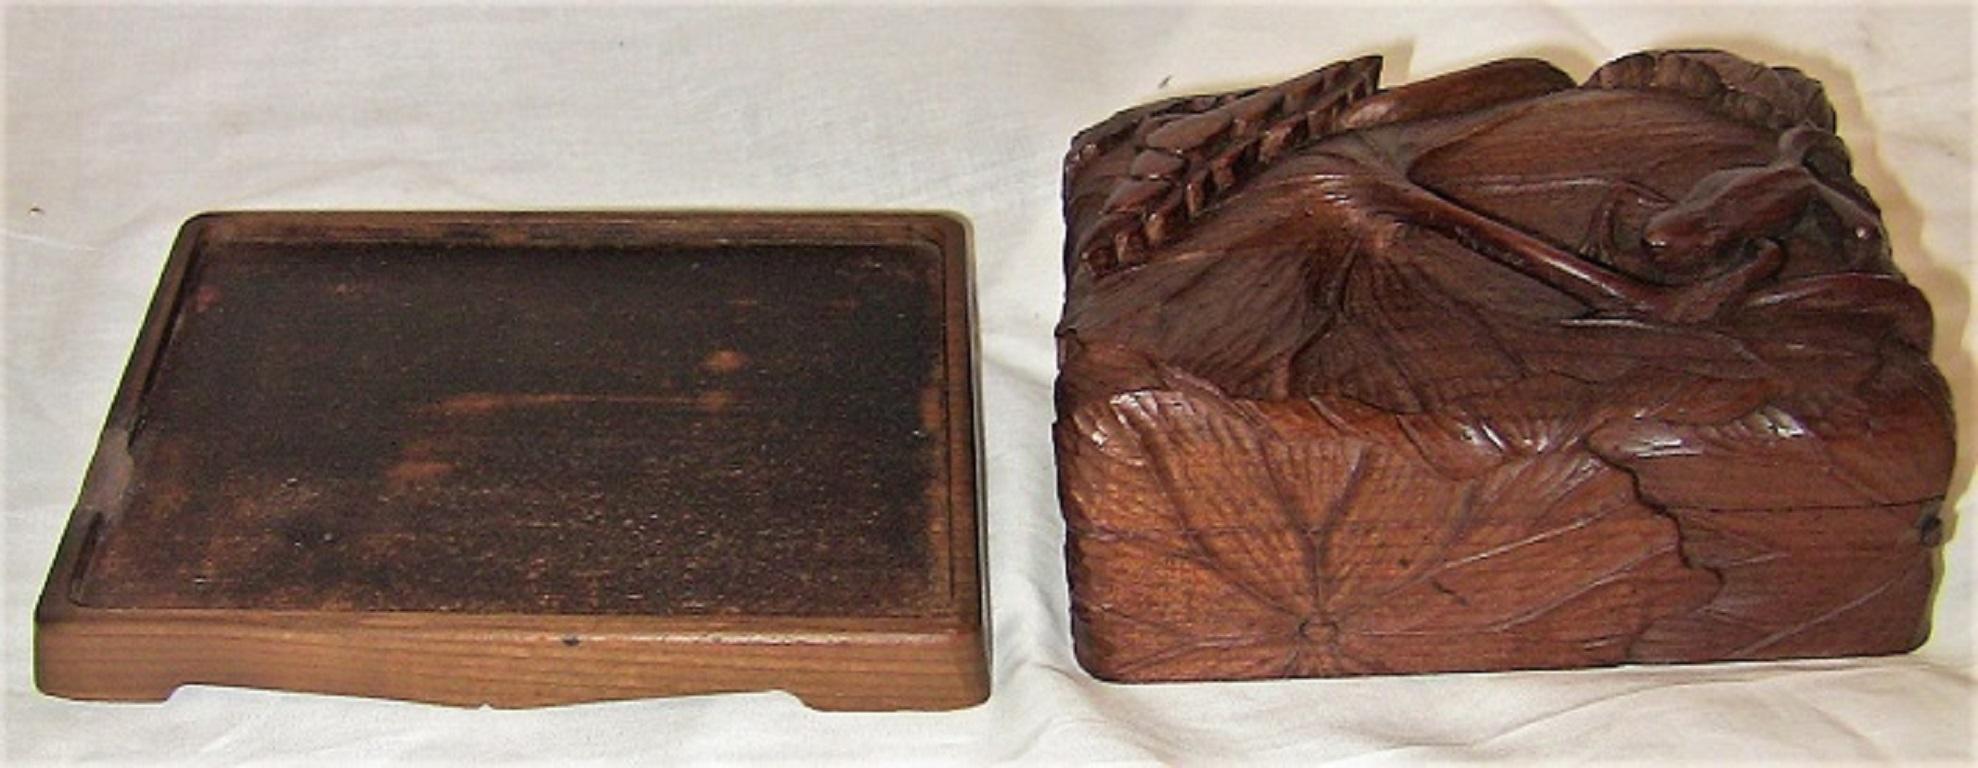 Presenting a glorious piece of Japanese carving and treen from circa 1890.

This is a lidded wooden box, on a stand, made of what appears to be camphor wood. A hardwood native to Japan.

The carving is Exquisite on this piece. The box is carved